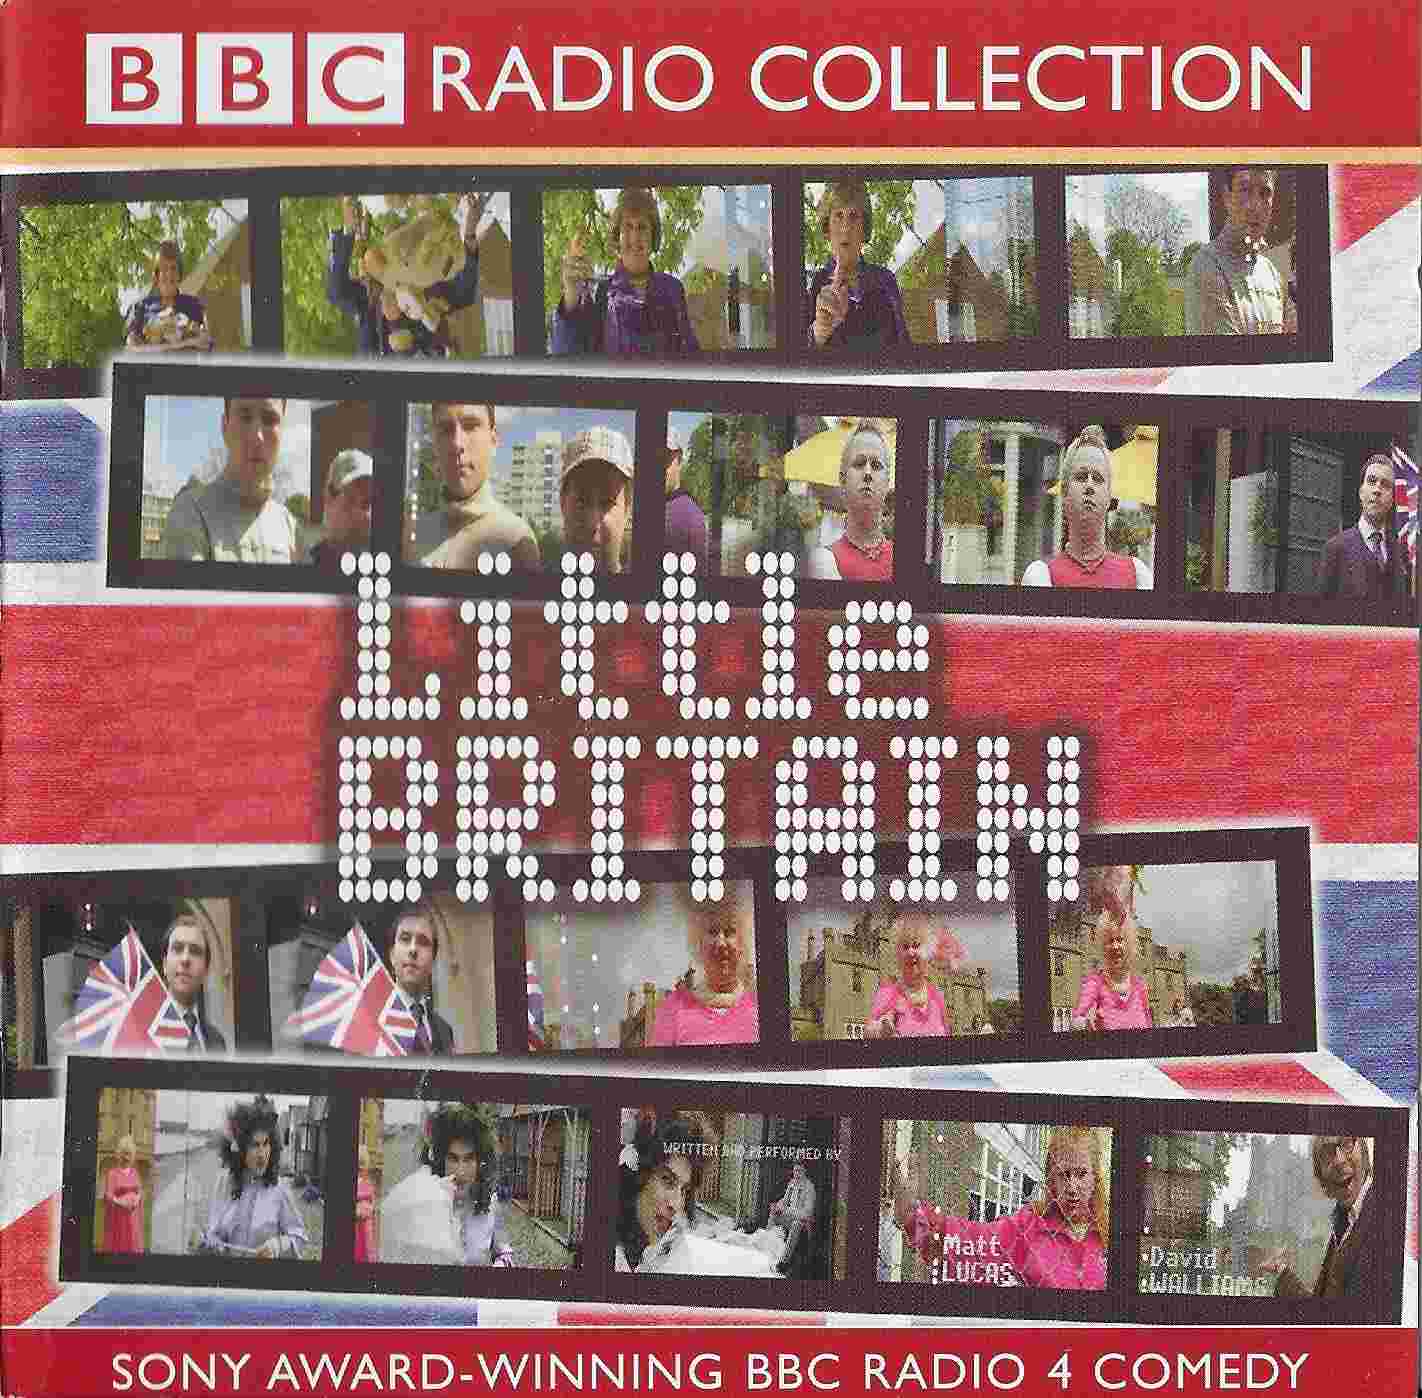 Picture of ISBN 0-563-52340-9 Little Britain by artist Matt Lucas / David Walliams from the BBC cds - Records and Tapes library